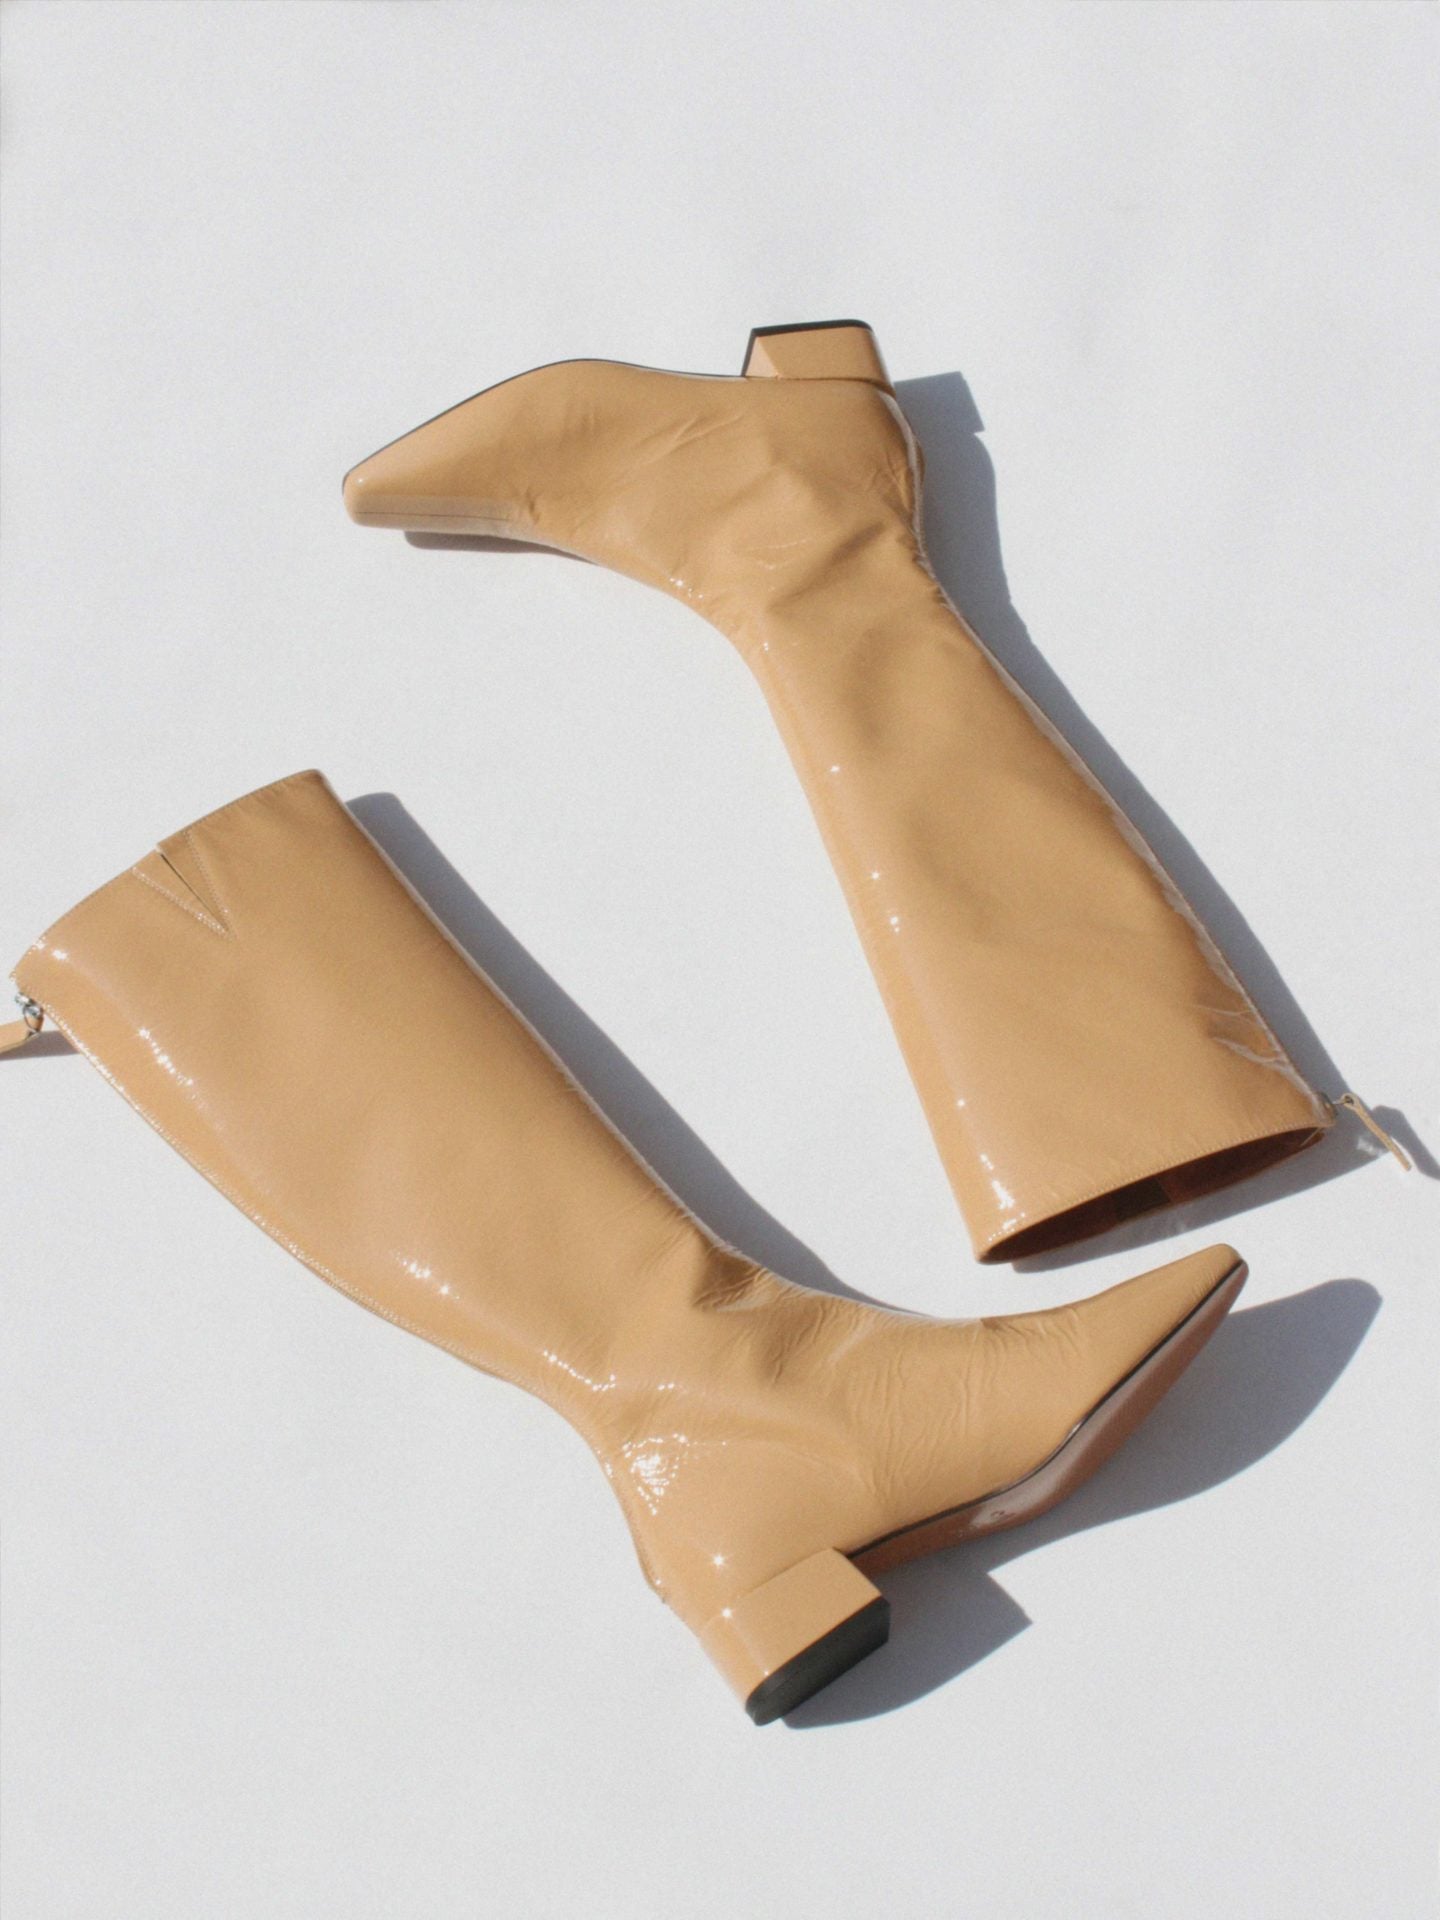 About Arienne CORDELIA leather boots in Wood. Available at EASE Toronto.